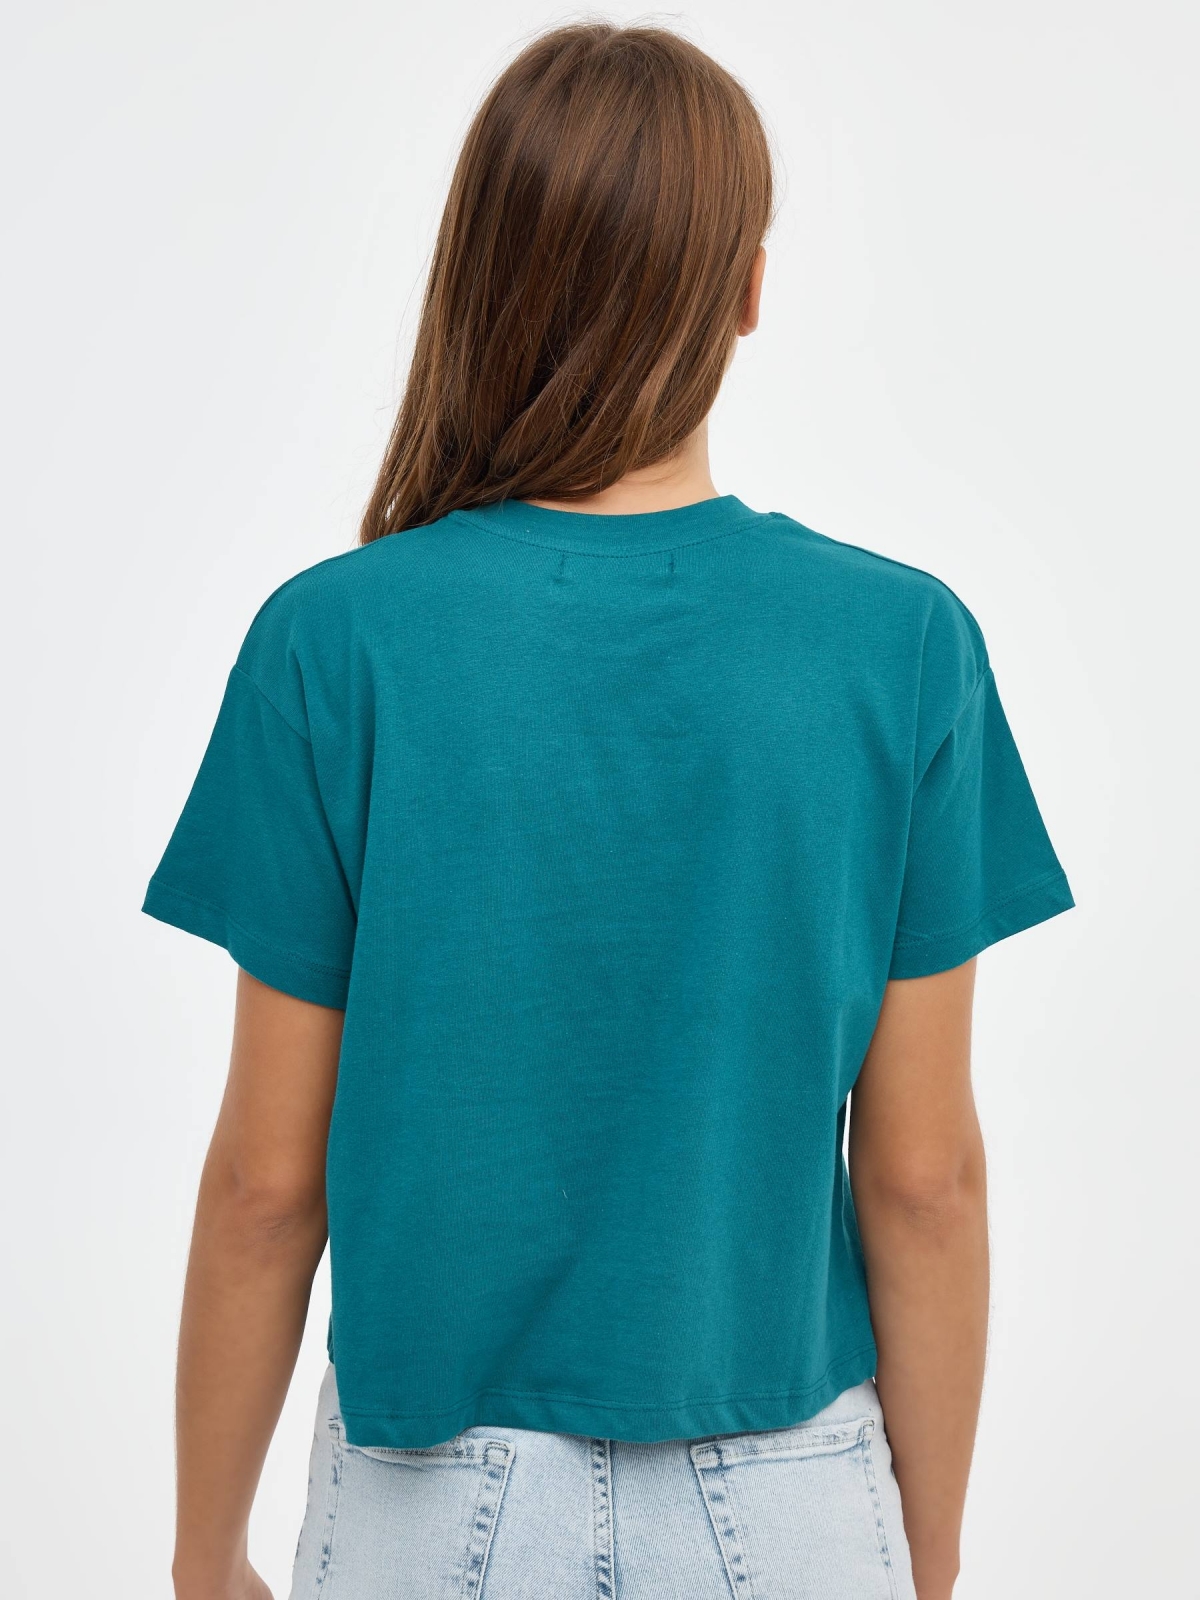 Oregon 25 crop top emerald middle back view